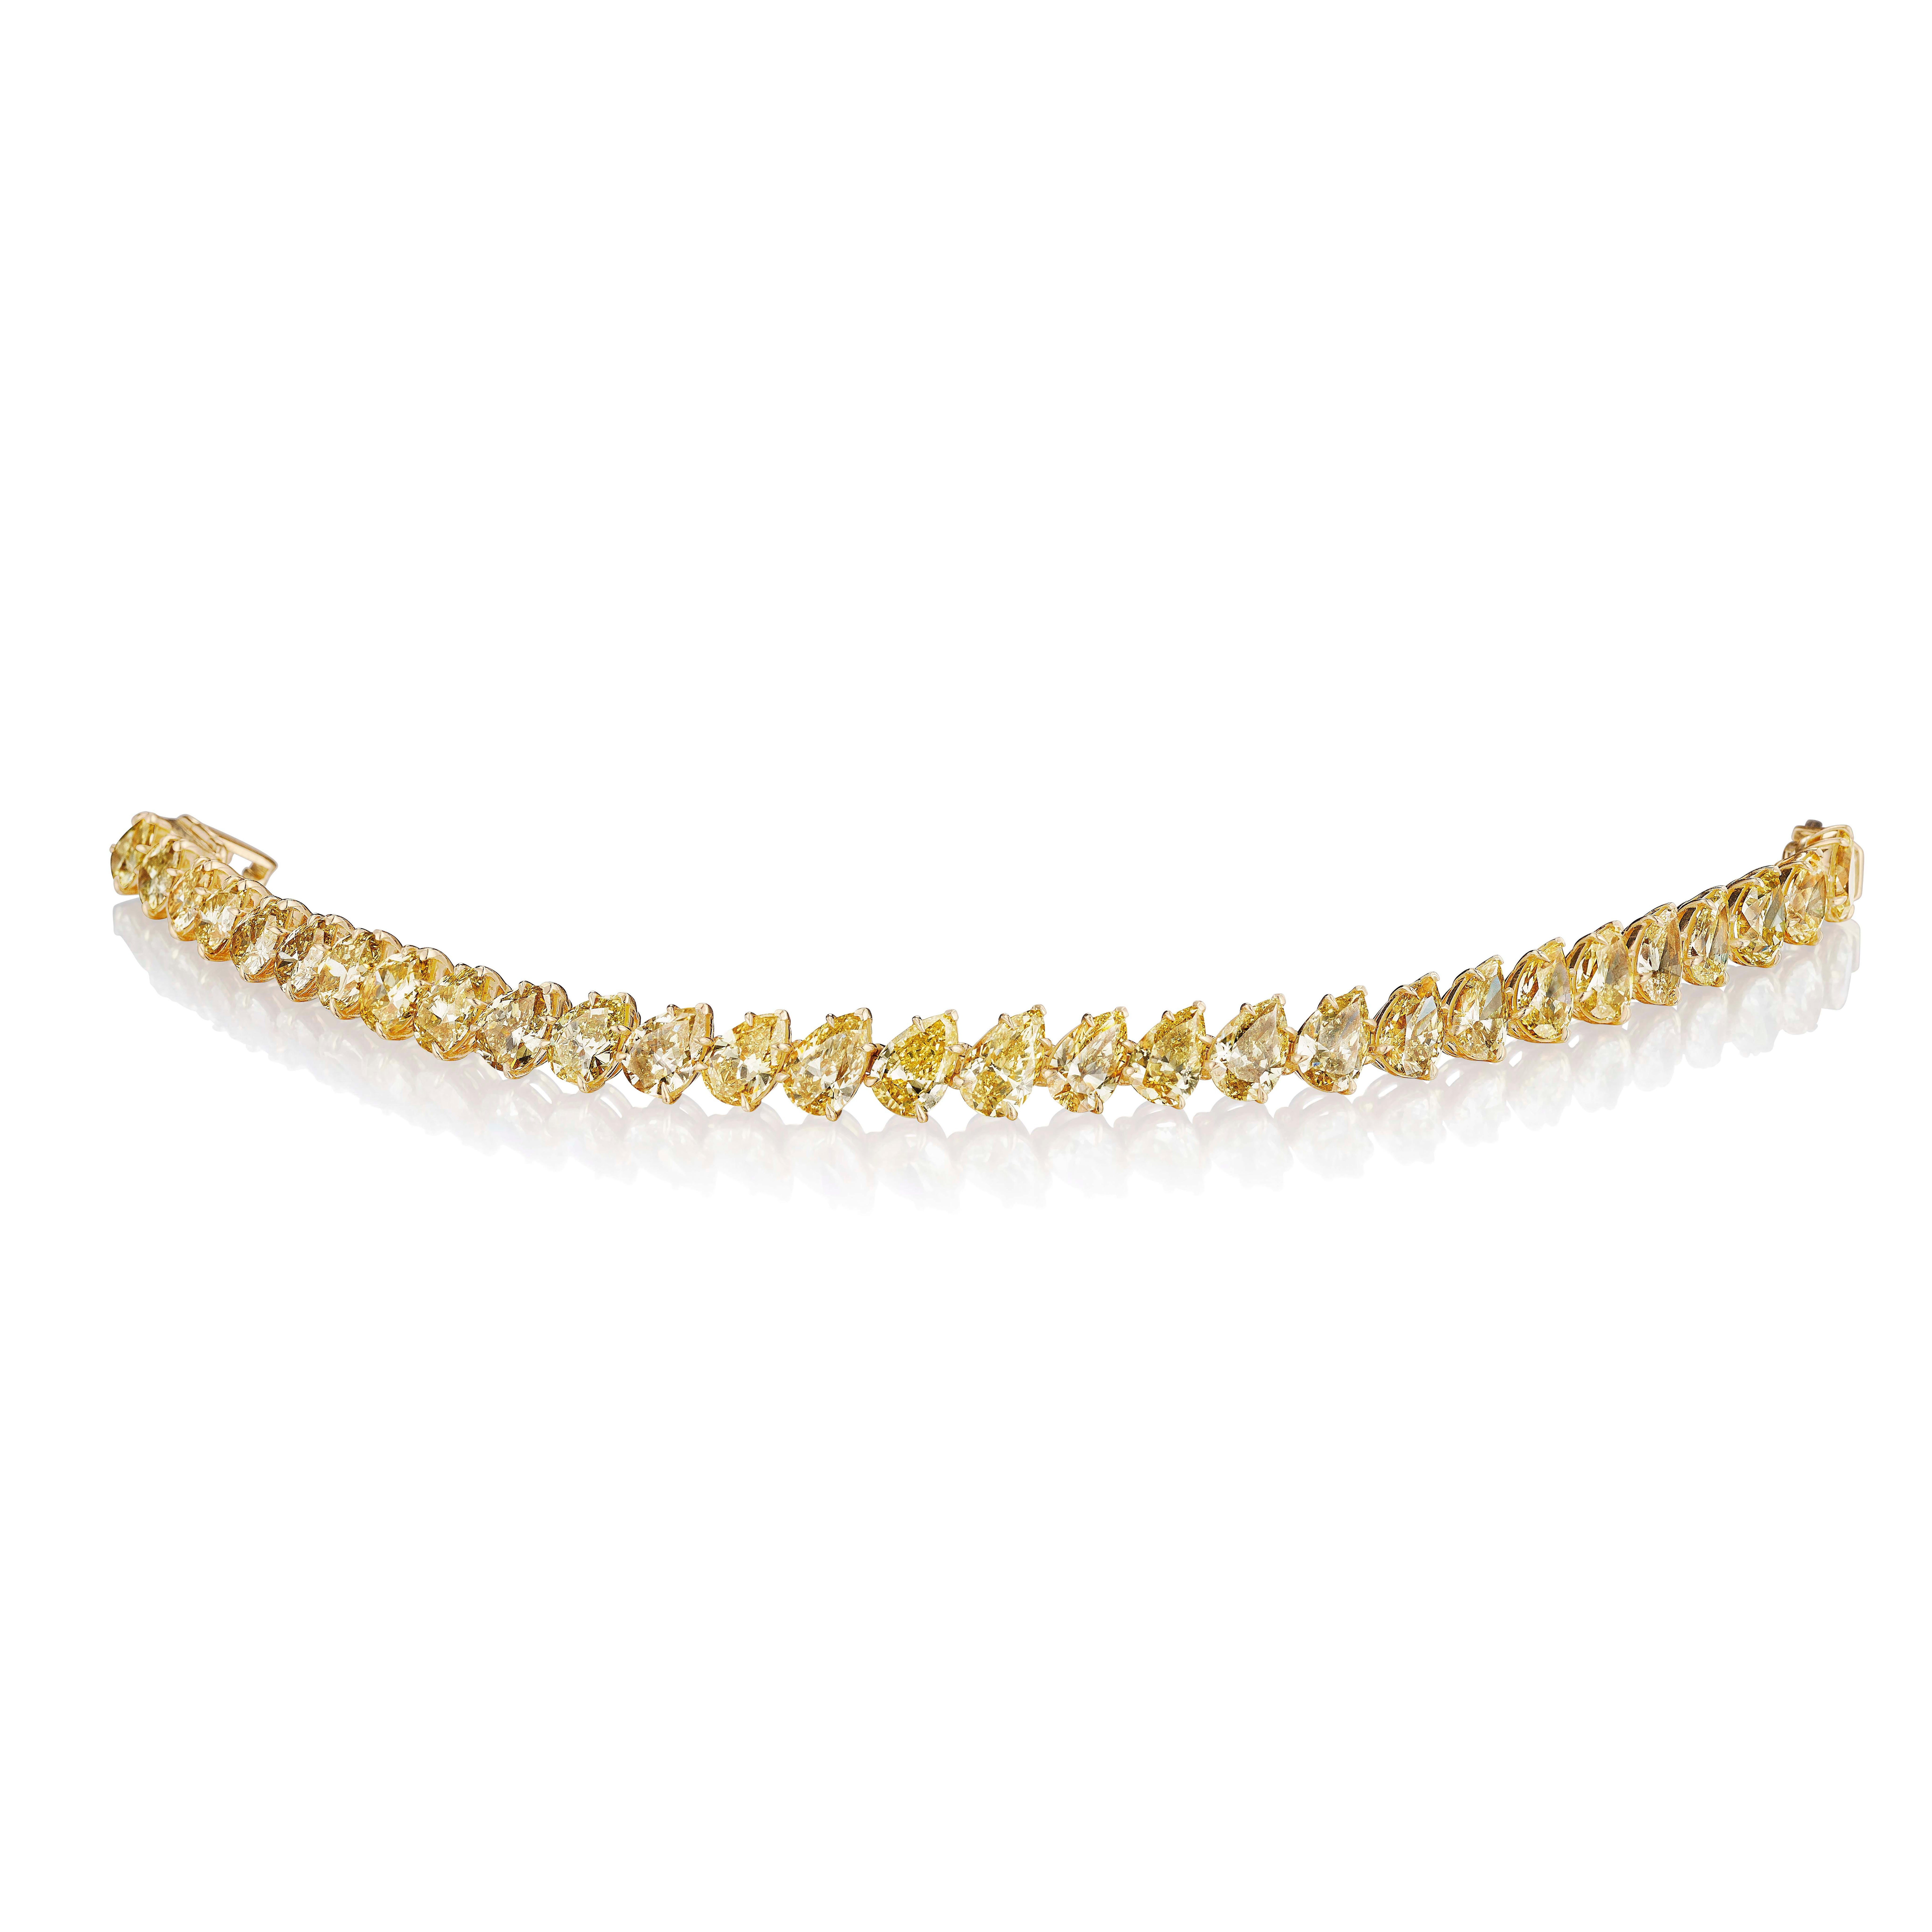 This beautiful tennis bracelet features 28 perfectly matched Pear Shaped yellow Diamonds set at an angle for a very elegant and sophisticated look.
Measure 6.5 inches.
Set in 18 Karat Yellow Gold.